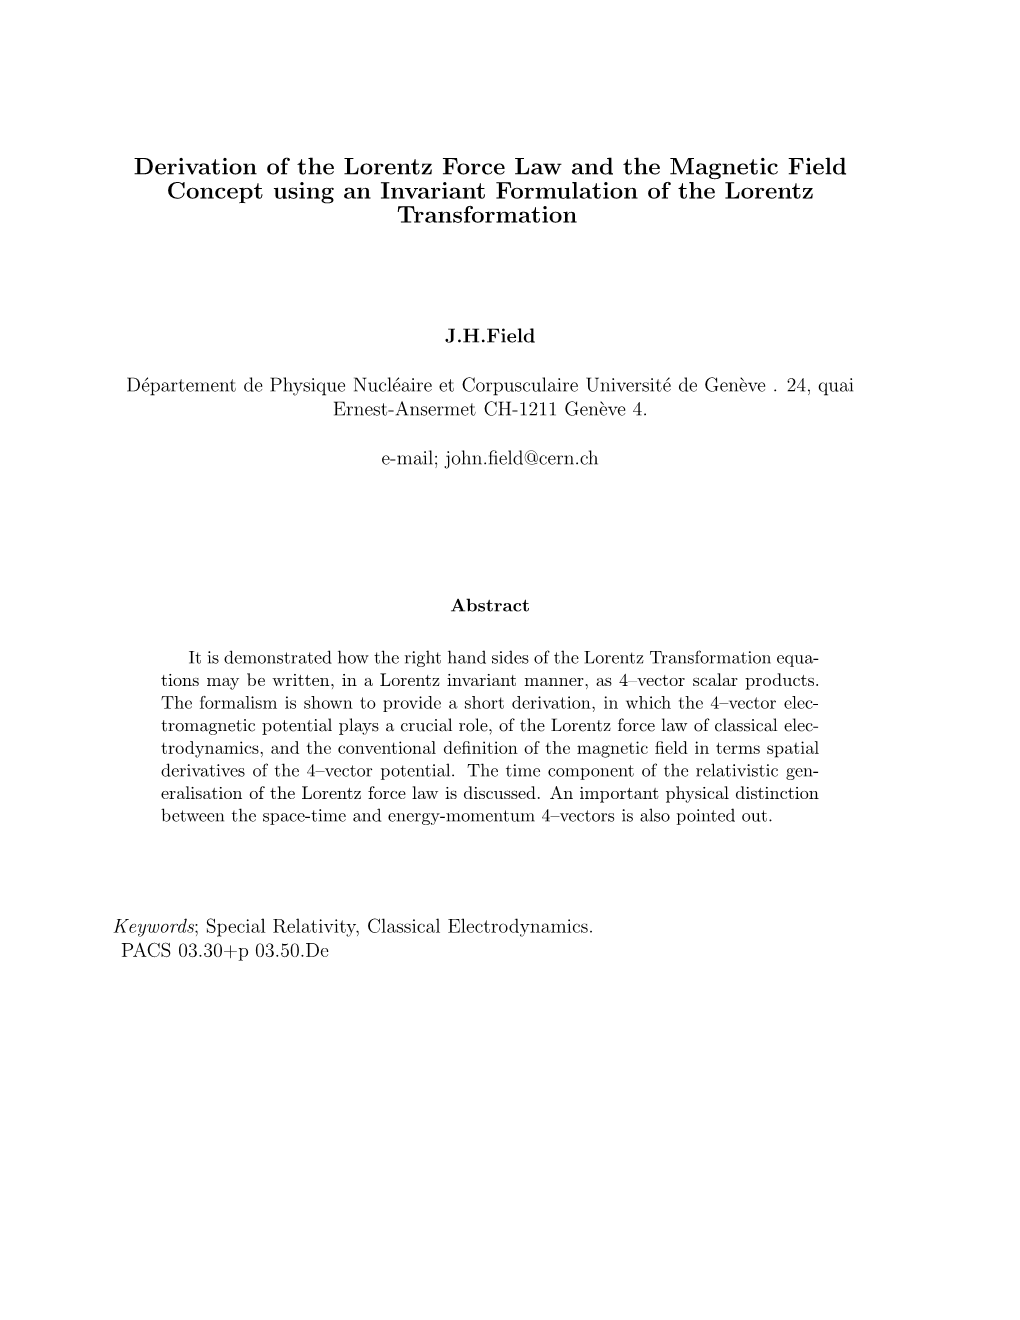 Derivation of the Lorentz Force Law and the Magnetic Field Concept Using an Invariant Formulation of the Lorentz Transformation